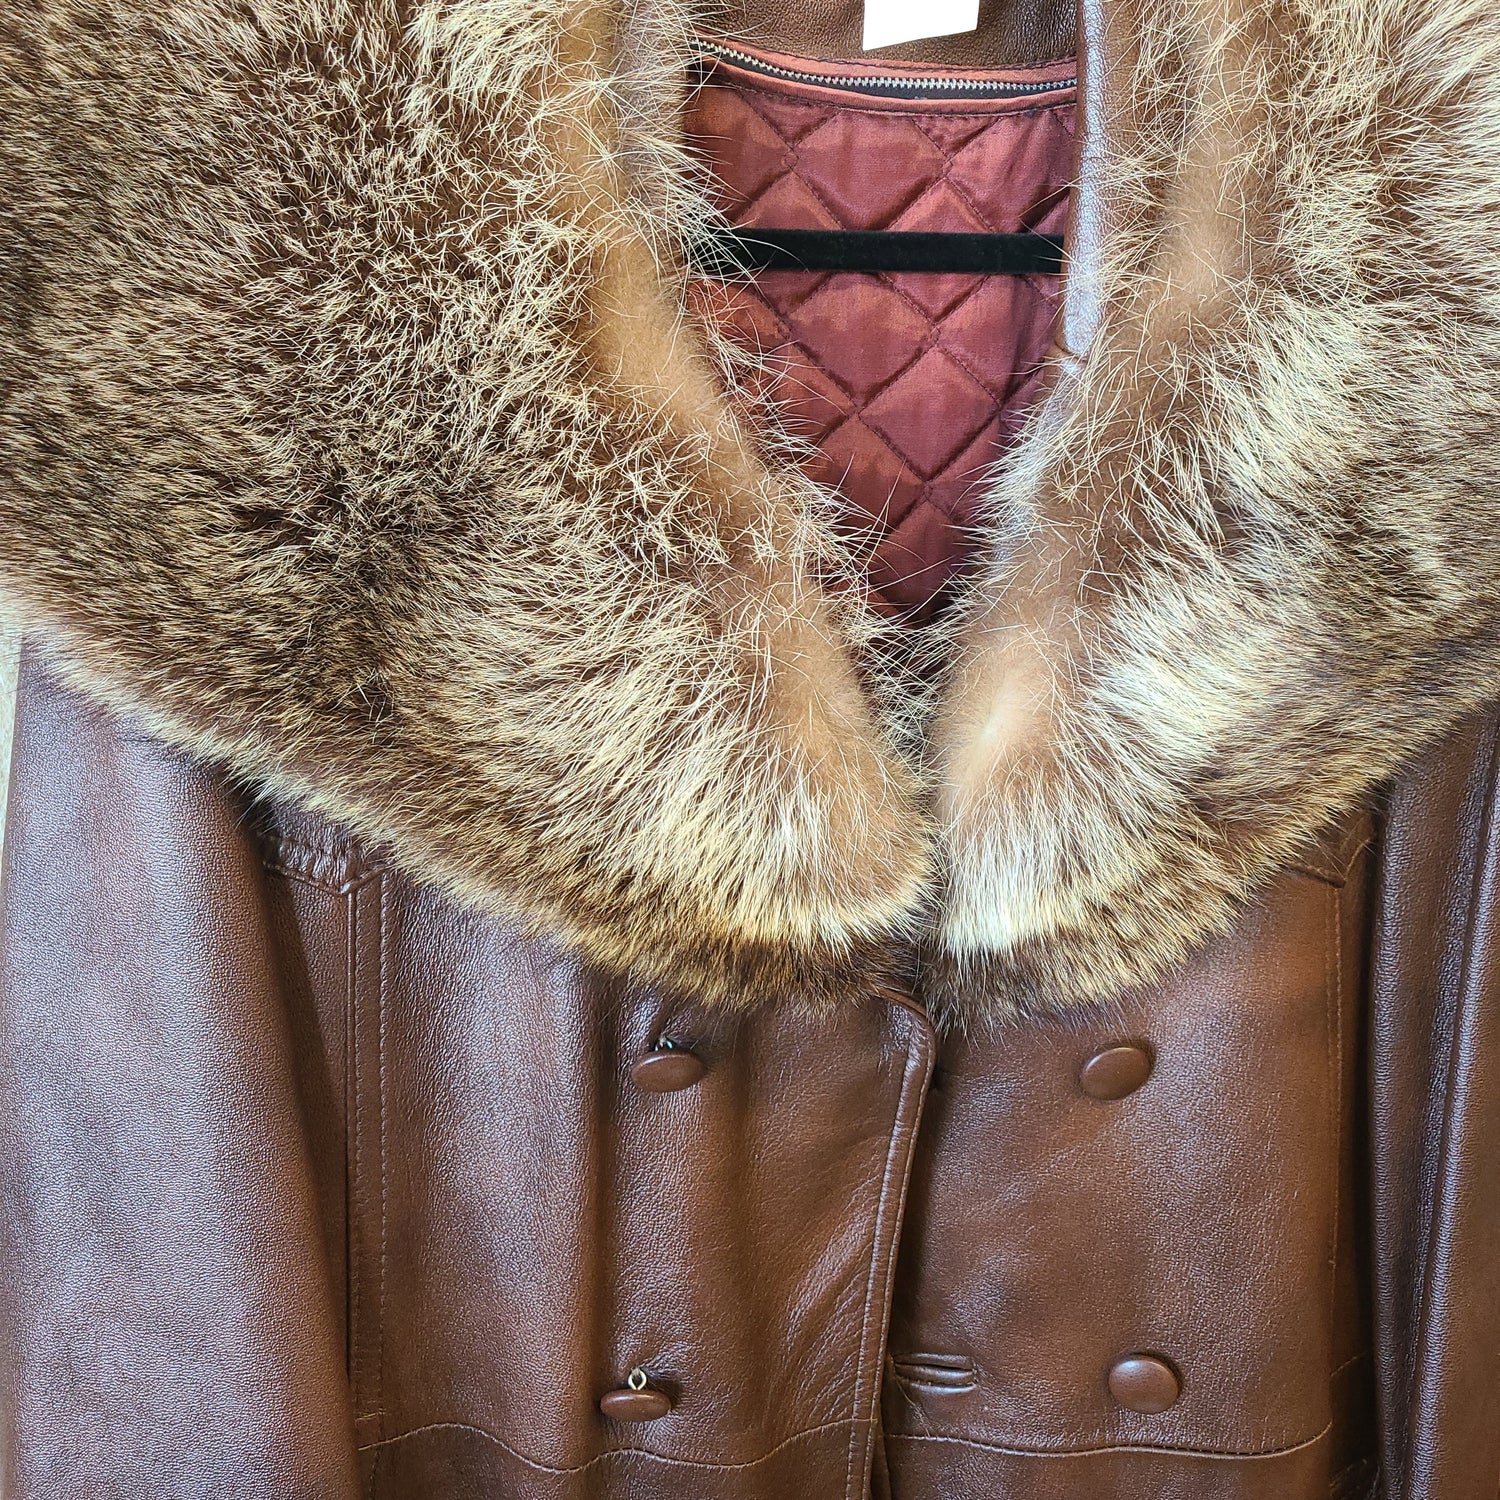 Vintage leather and fur - Classic & Kitsch